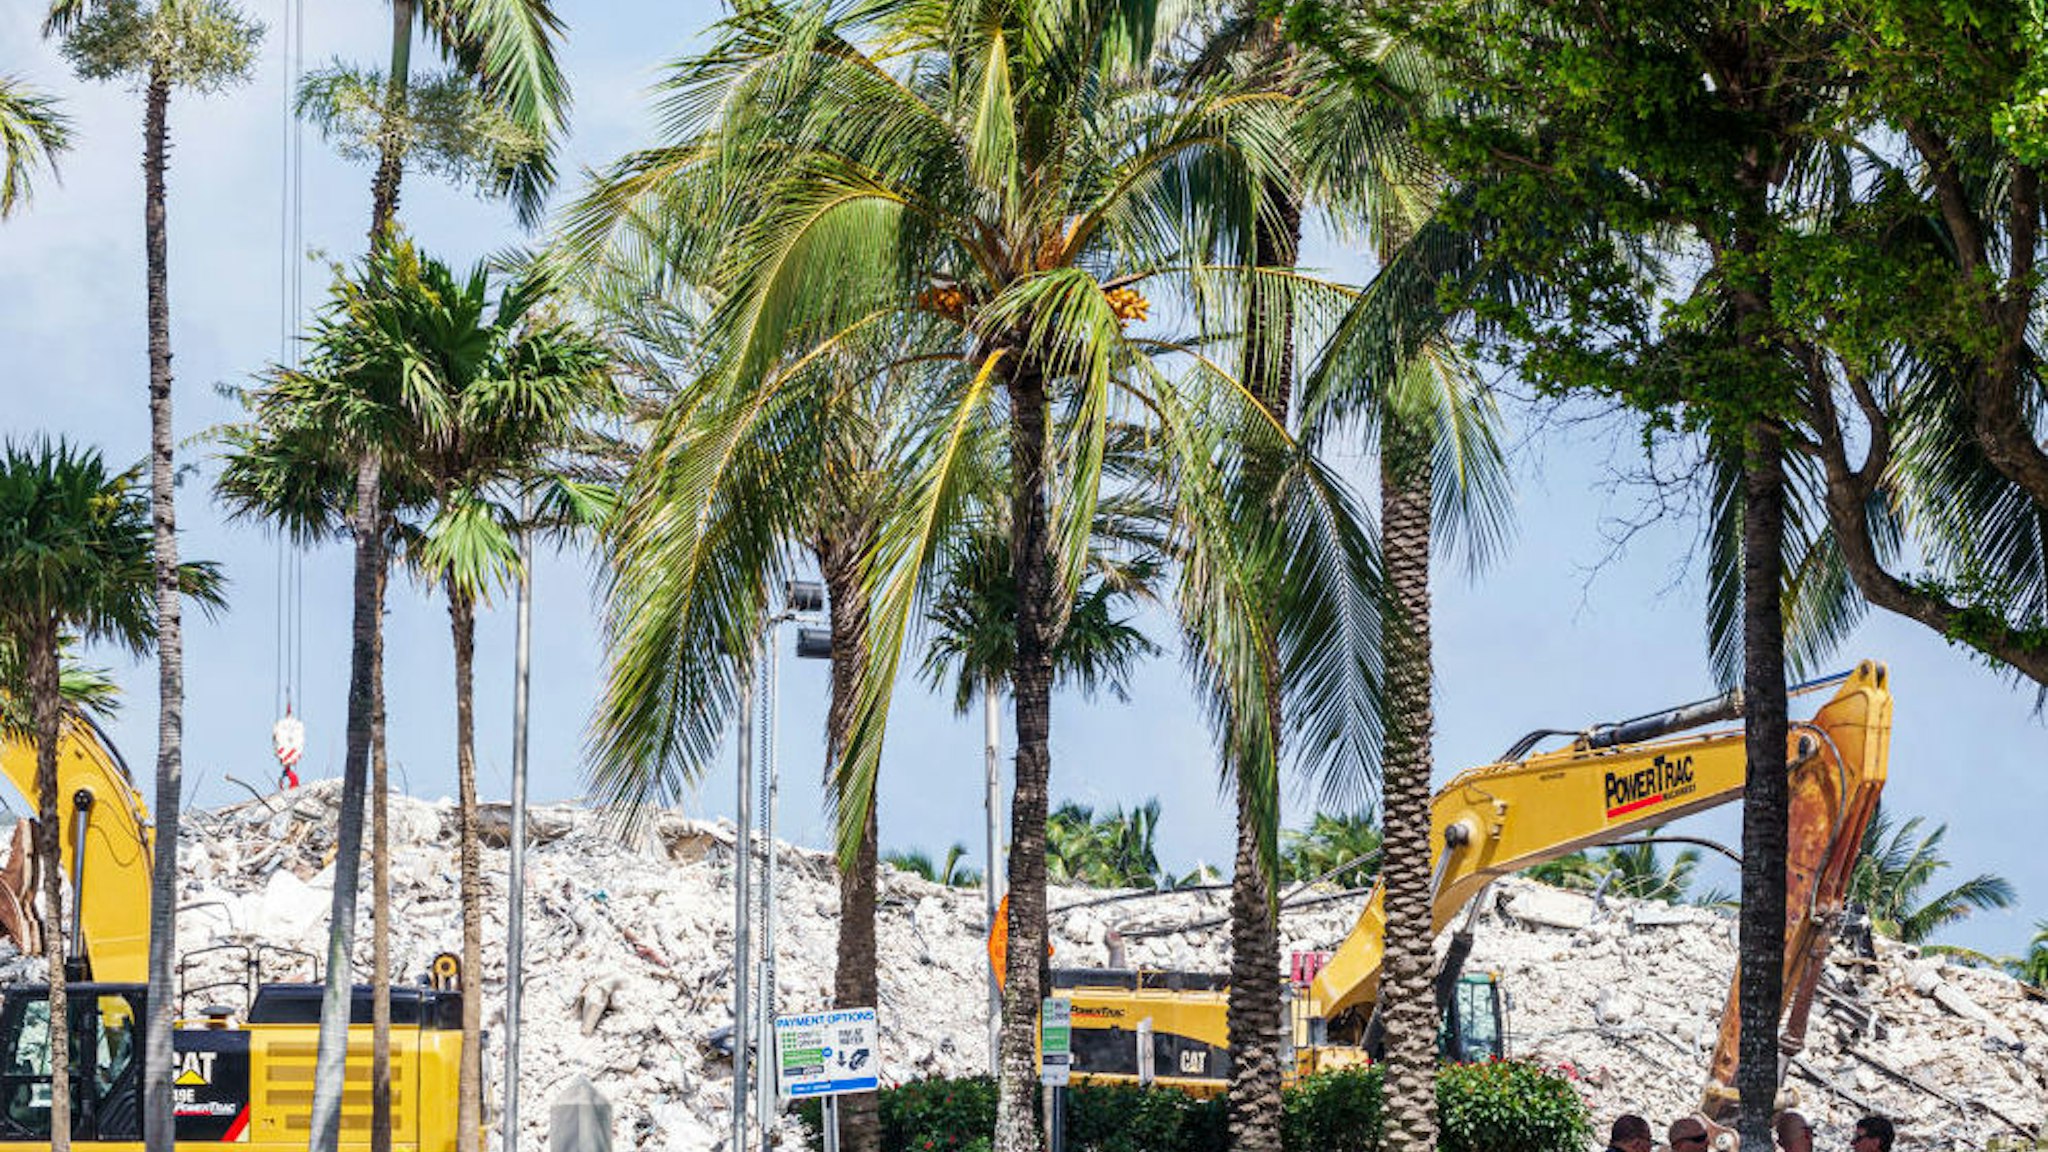 Florida, Miami, Surfside Building Collapse, pile of debris with heavy equipment to help remove